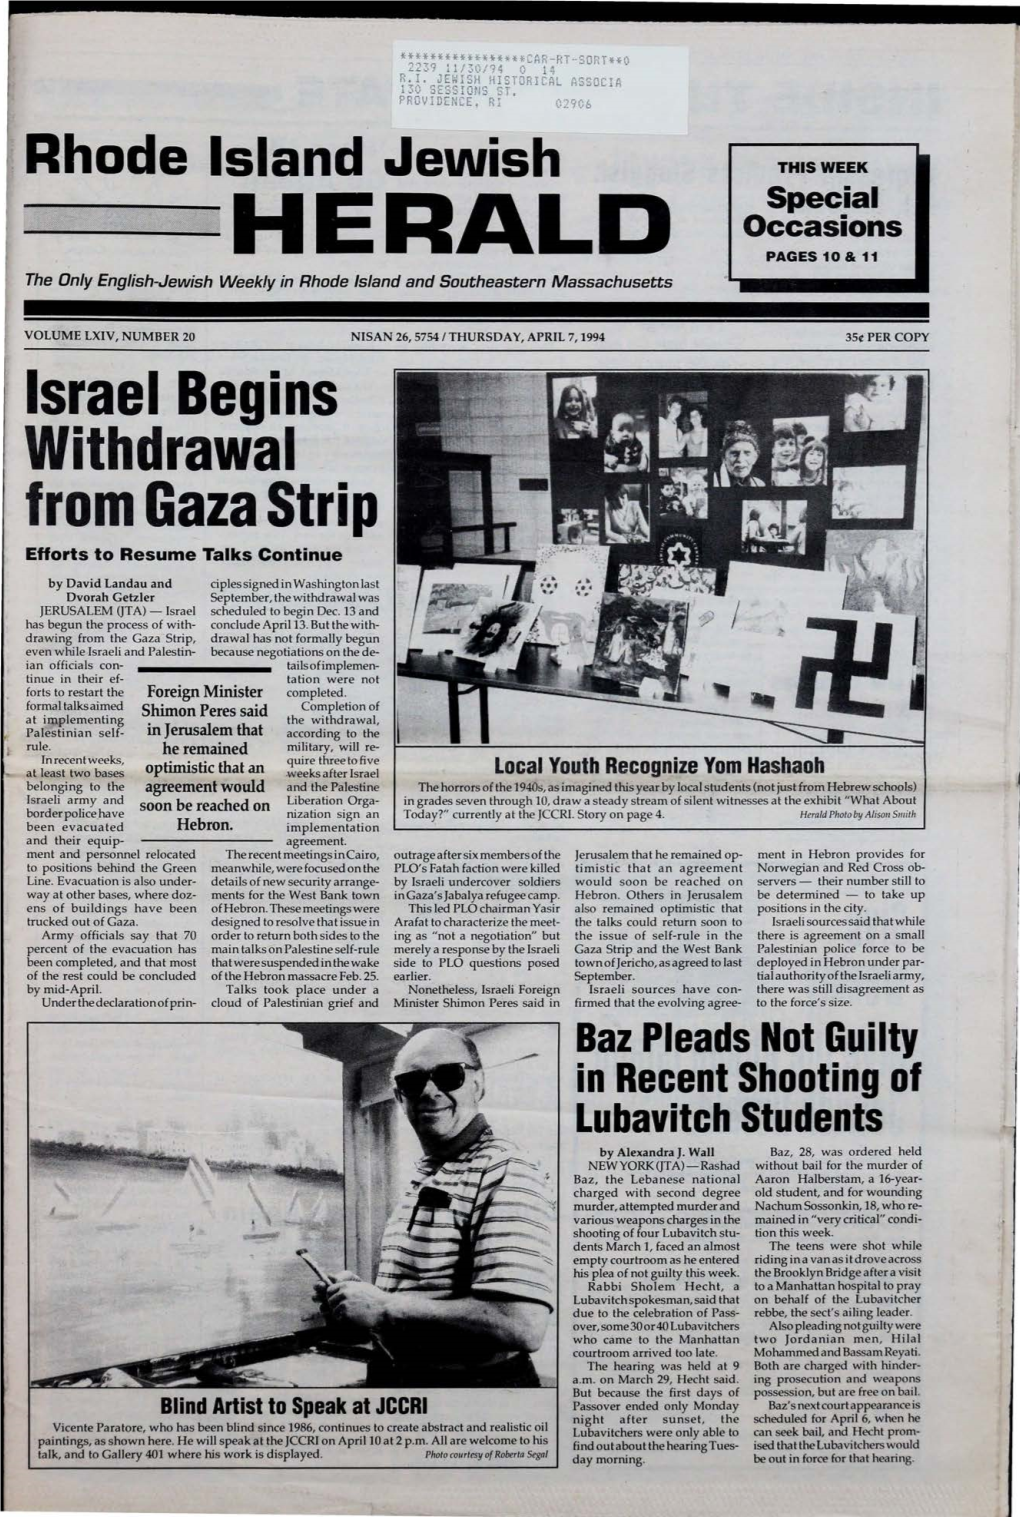 APRIL 7, 1994 35{PER COPY Israel Begins Withdrawal from Gaza Strip Efforts to Resume Talks Continue